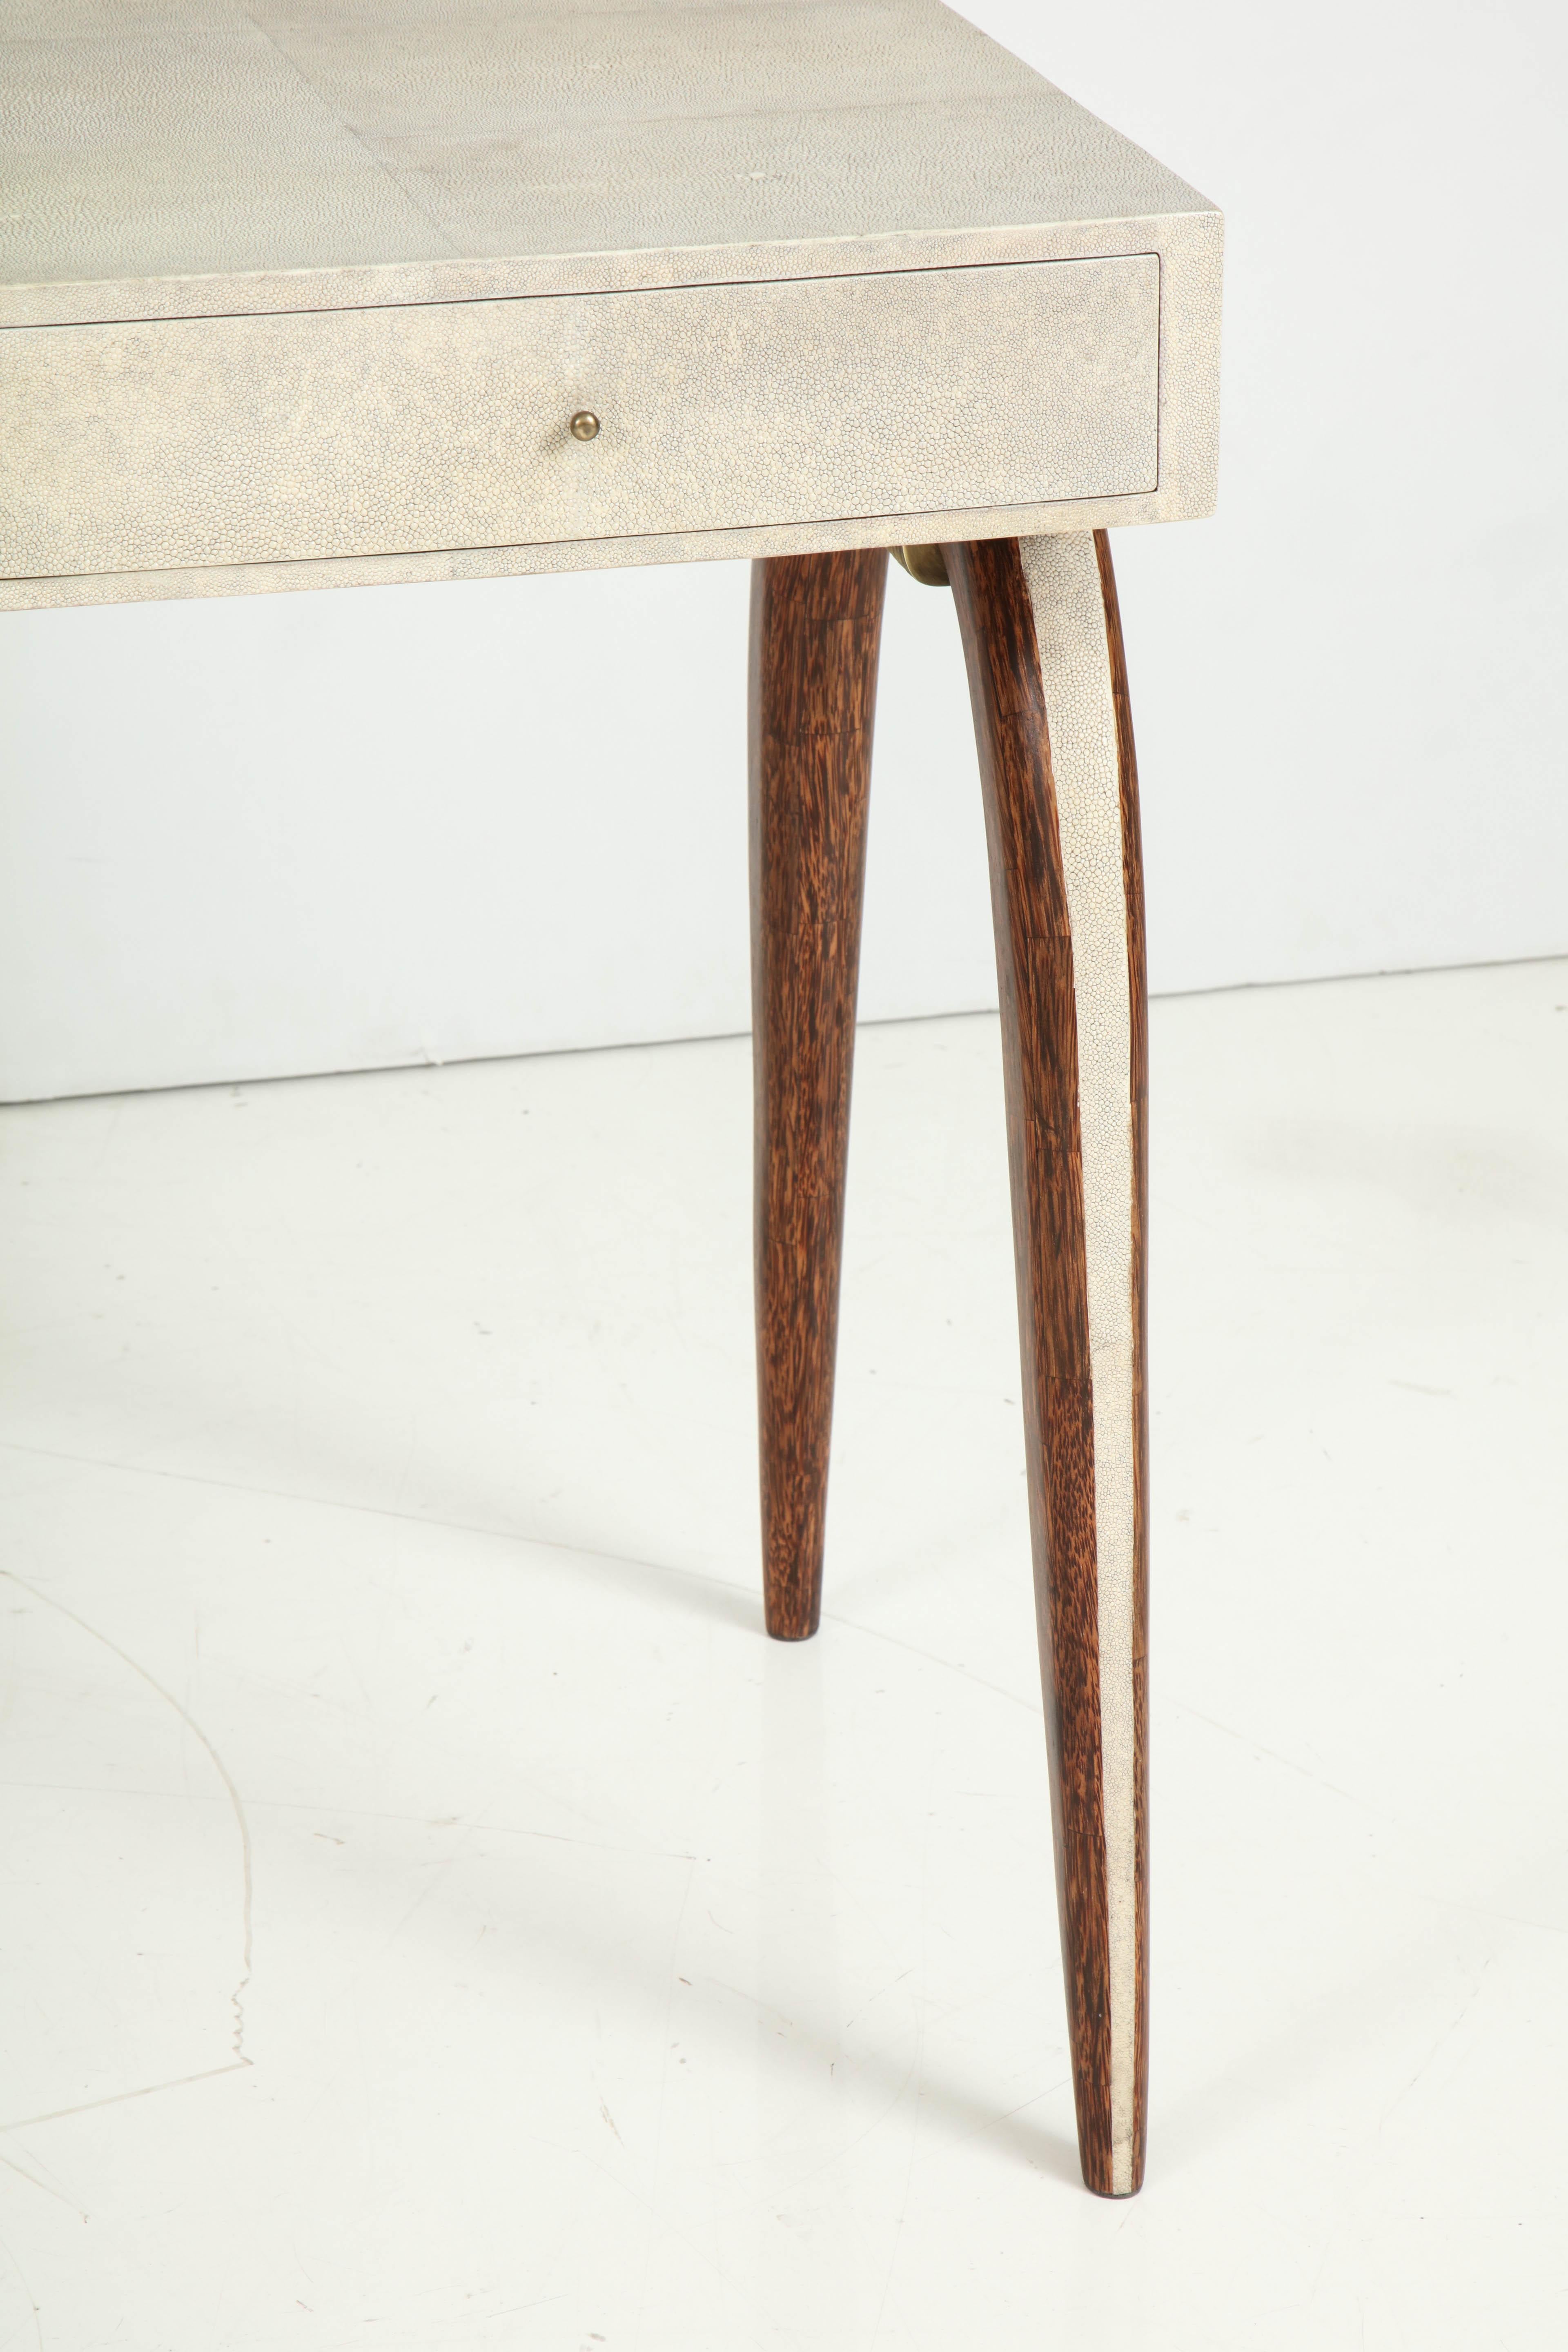 Contemporary Shagreen Desk With Bronze and Palm Wood Details